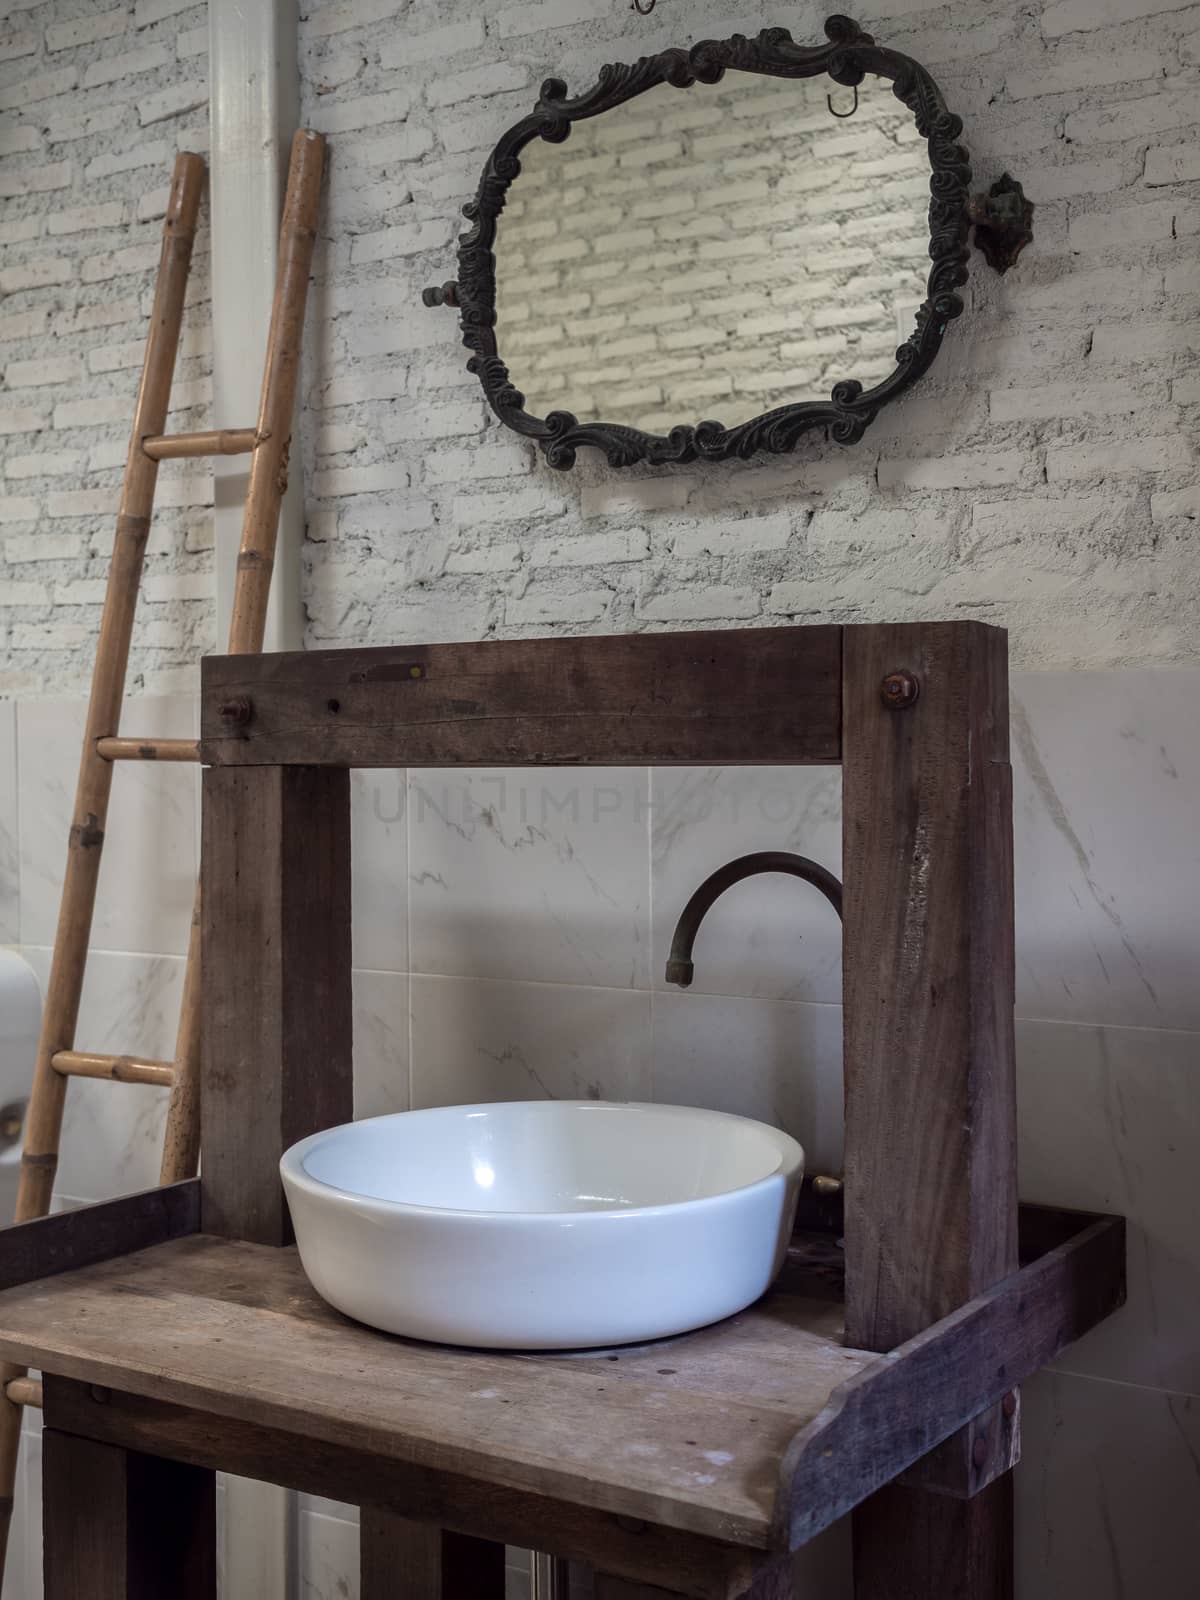 White clean ceramic sink bath and faucet on vintage wooden table and vintage mirror and wood ladder decoration on white brick wall background vertical style.